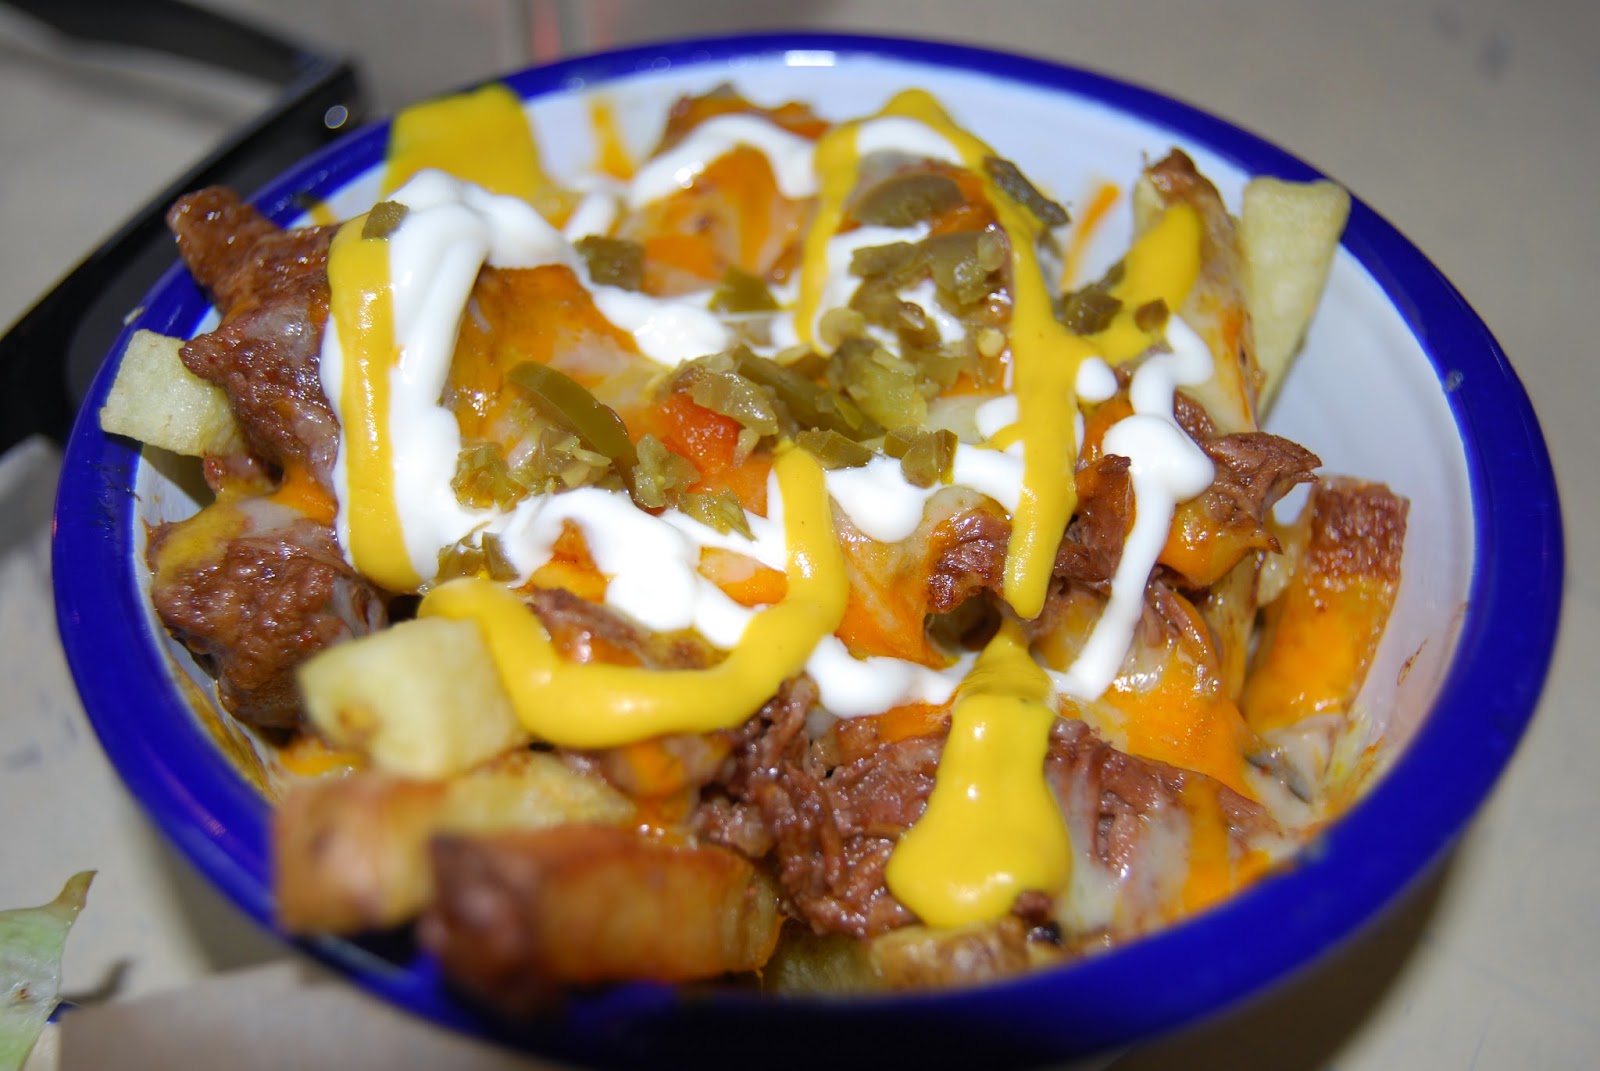 fries, pulled beef, sour cream, jalapeno